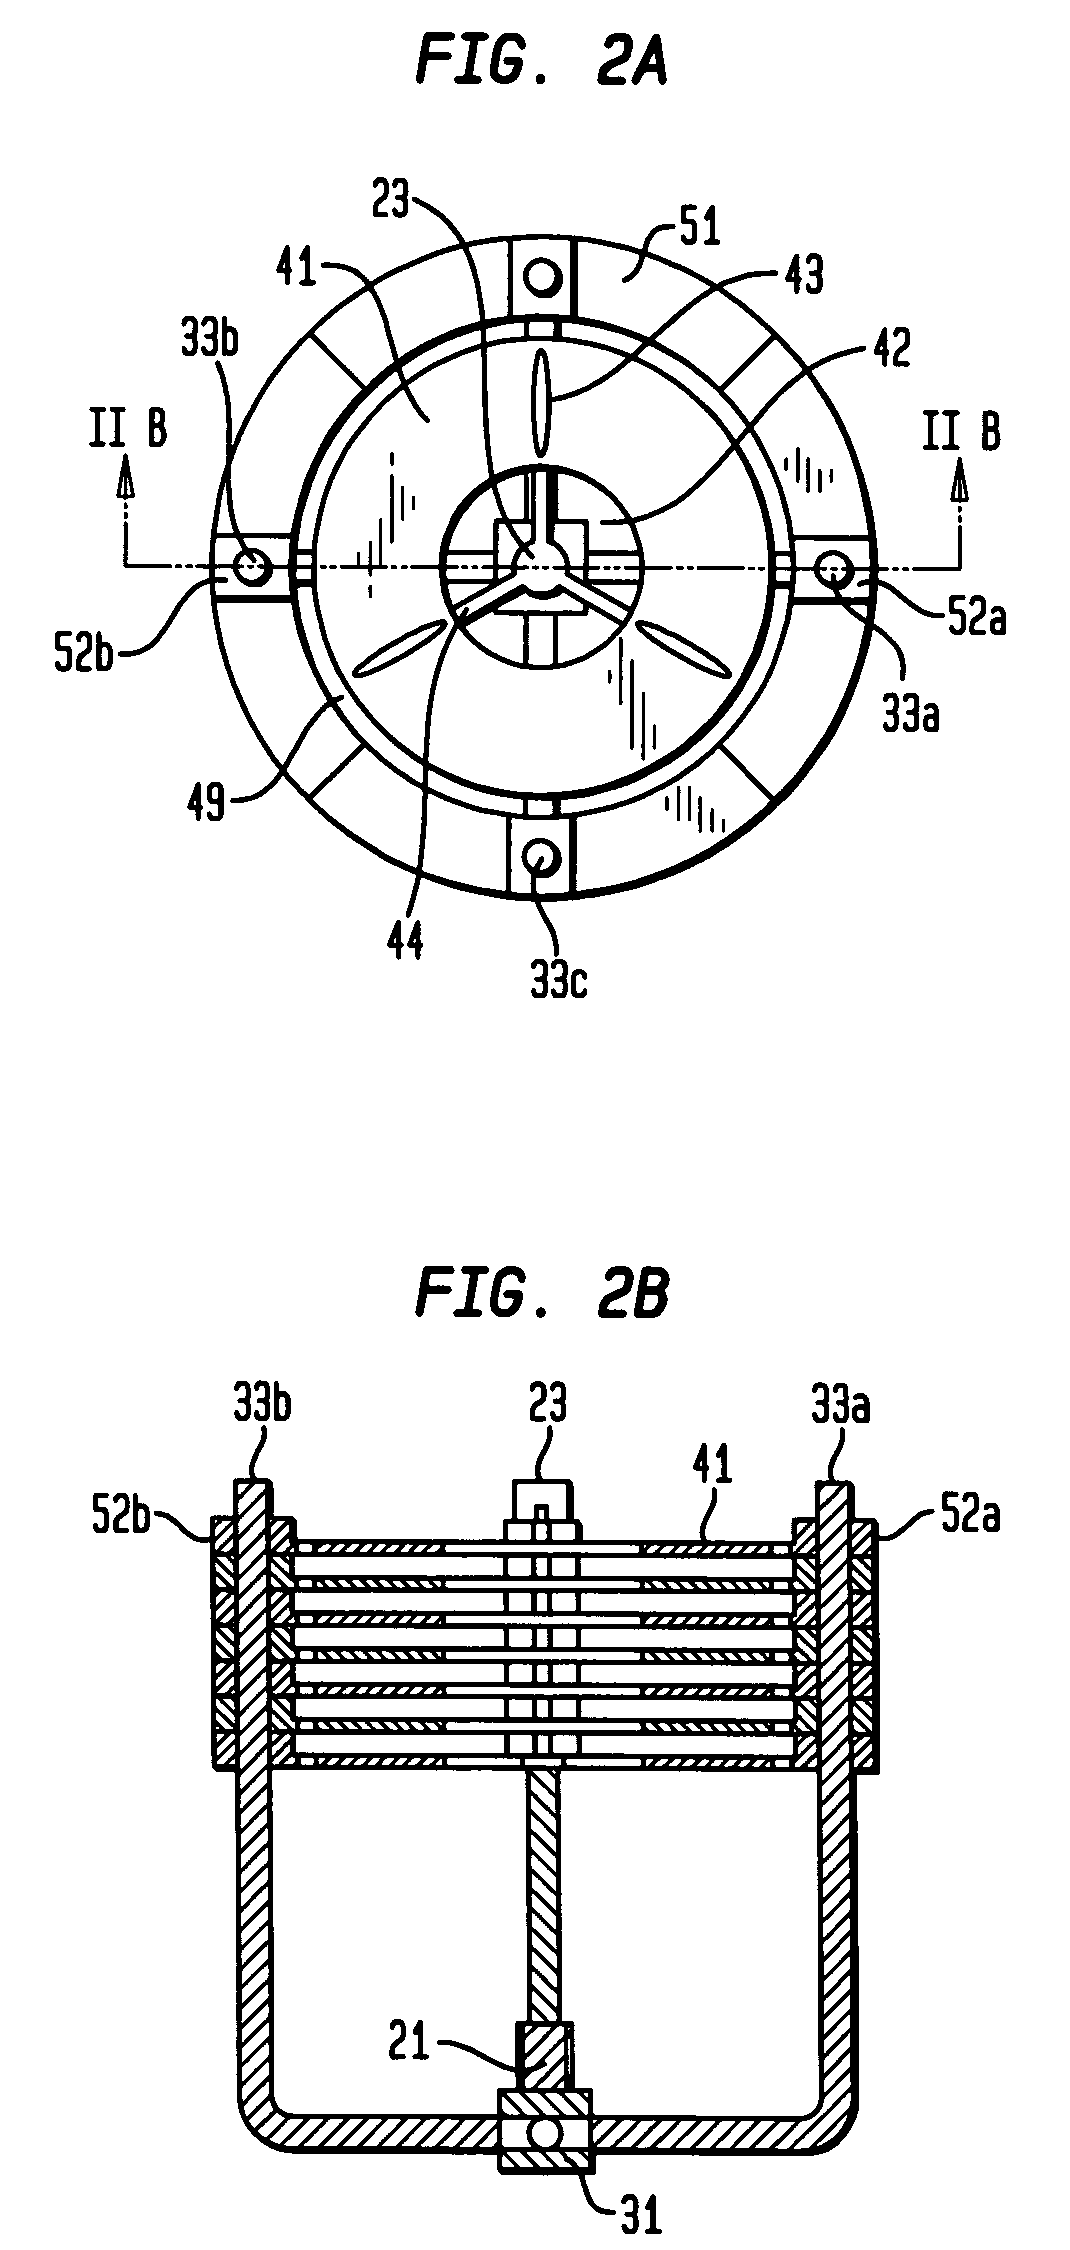 Cooling apparatus for heat generating devices